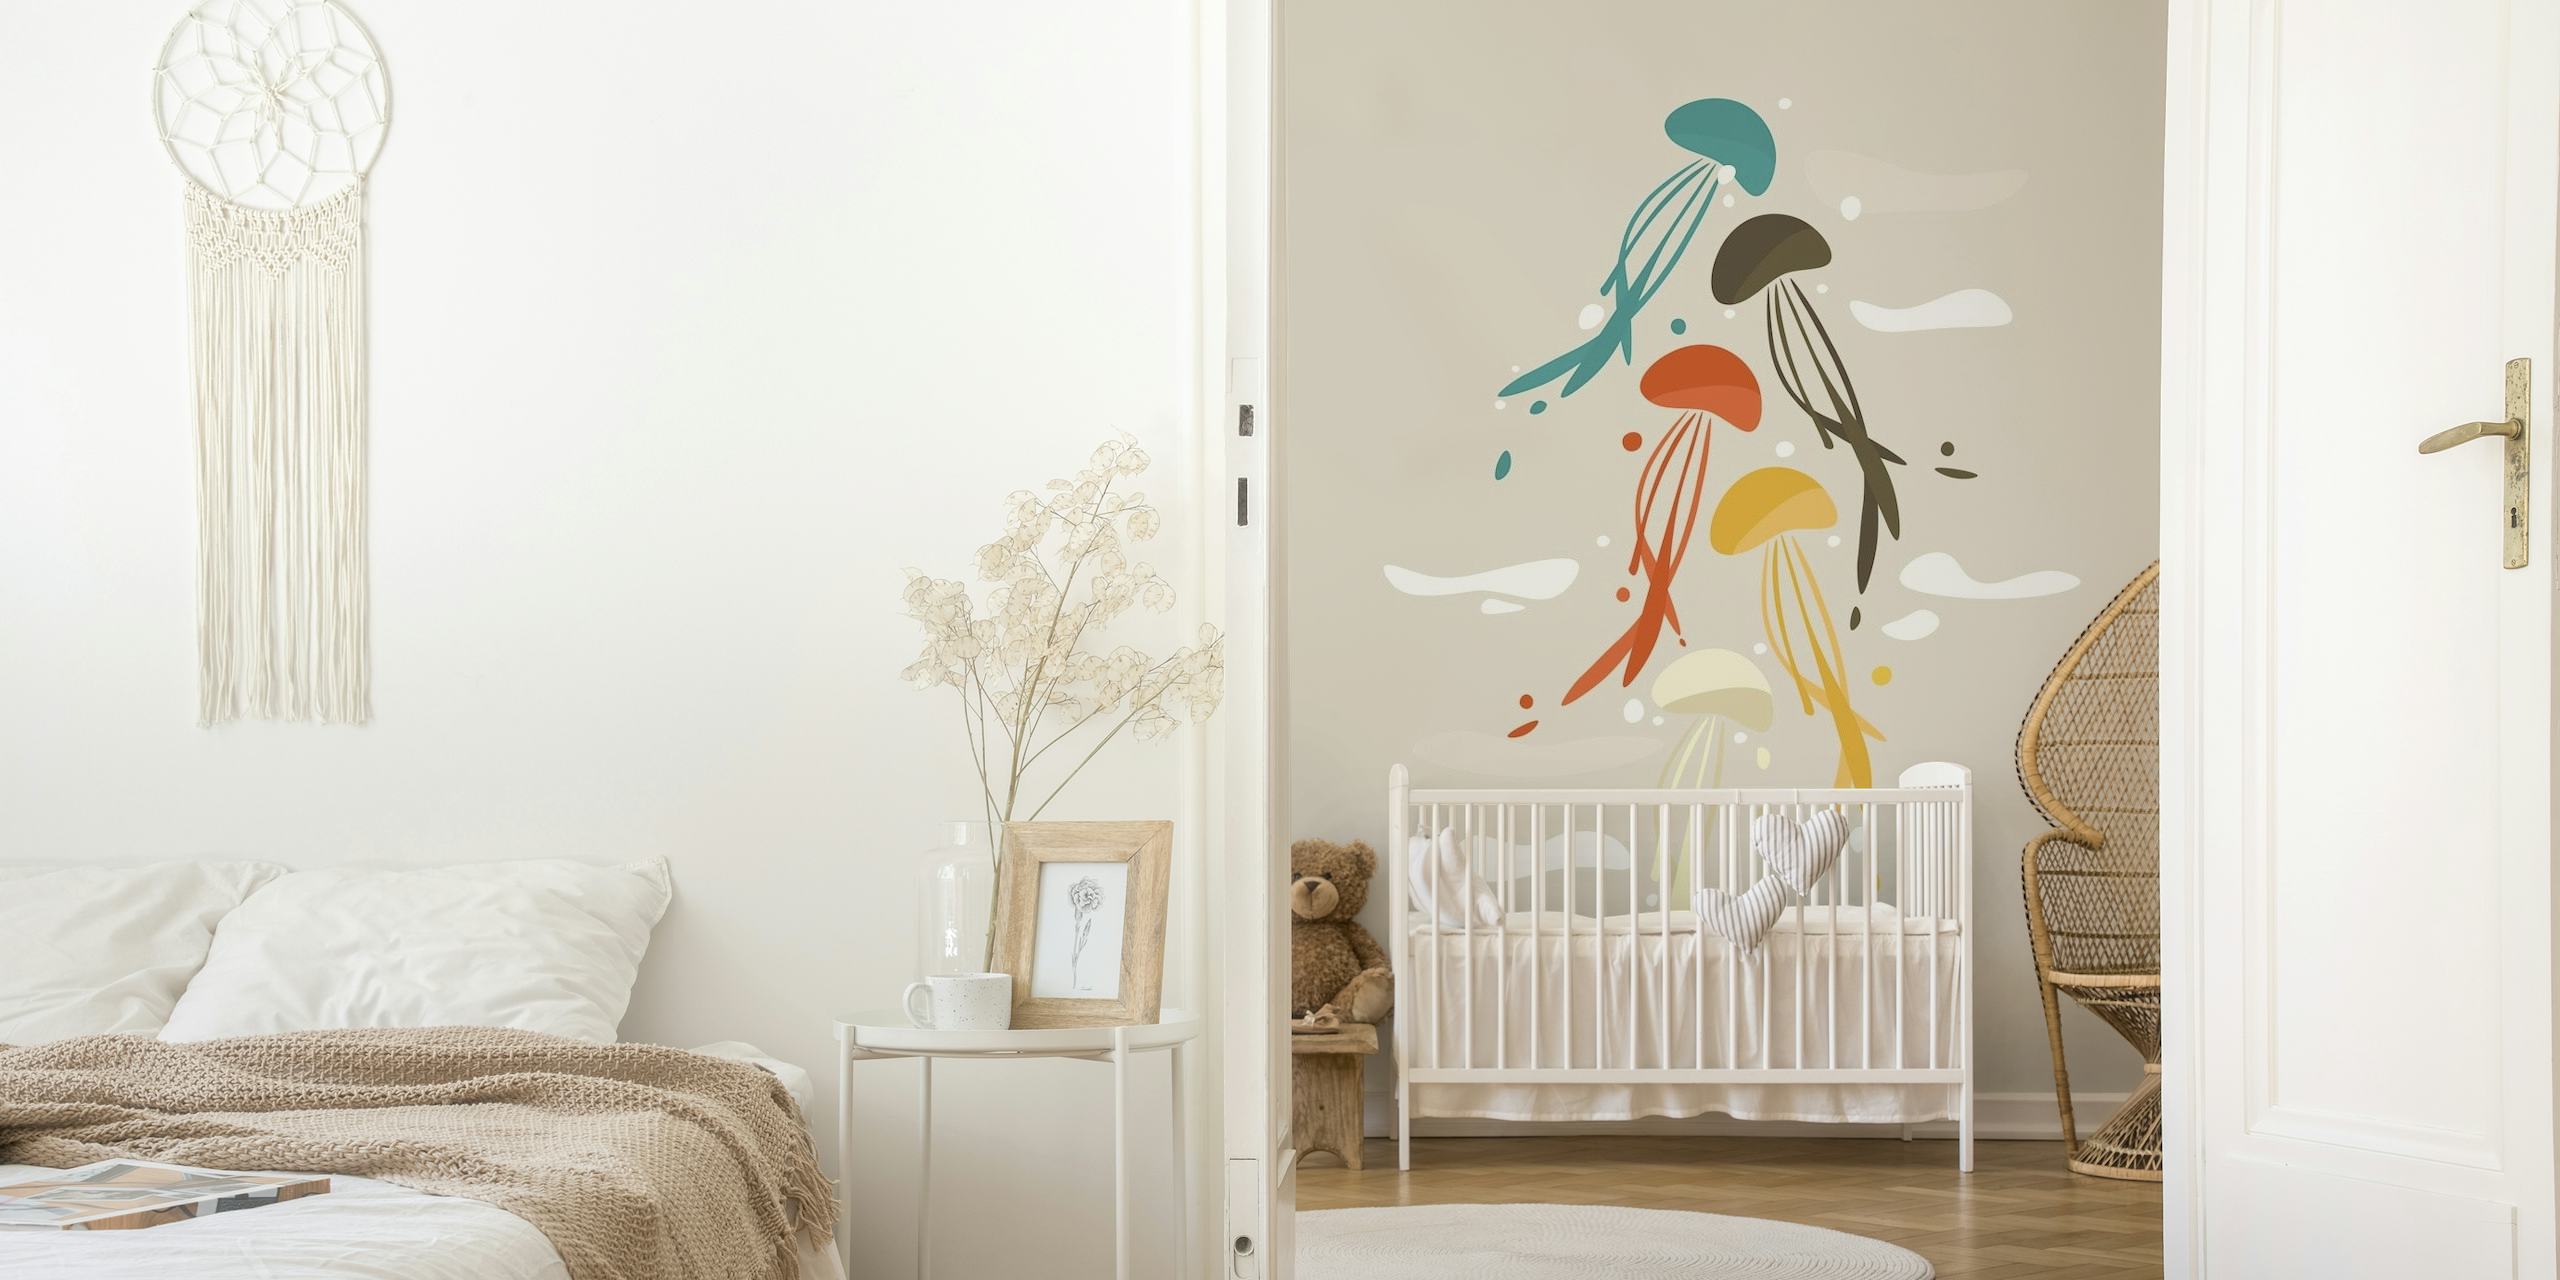 Abstract jellyfish wall mural in soft colors